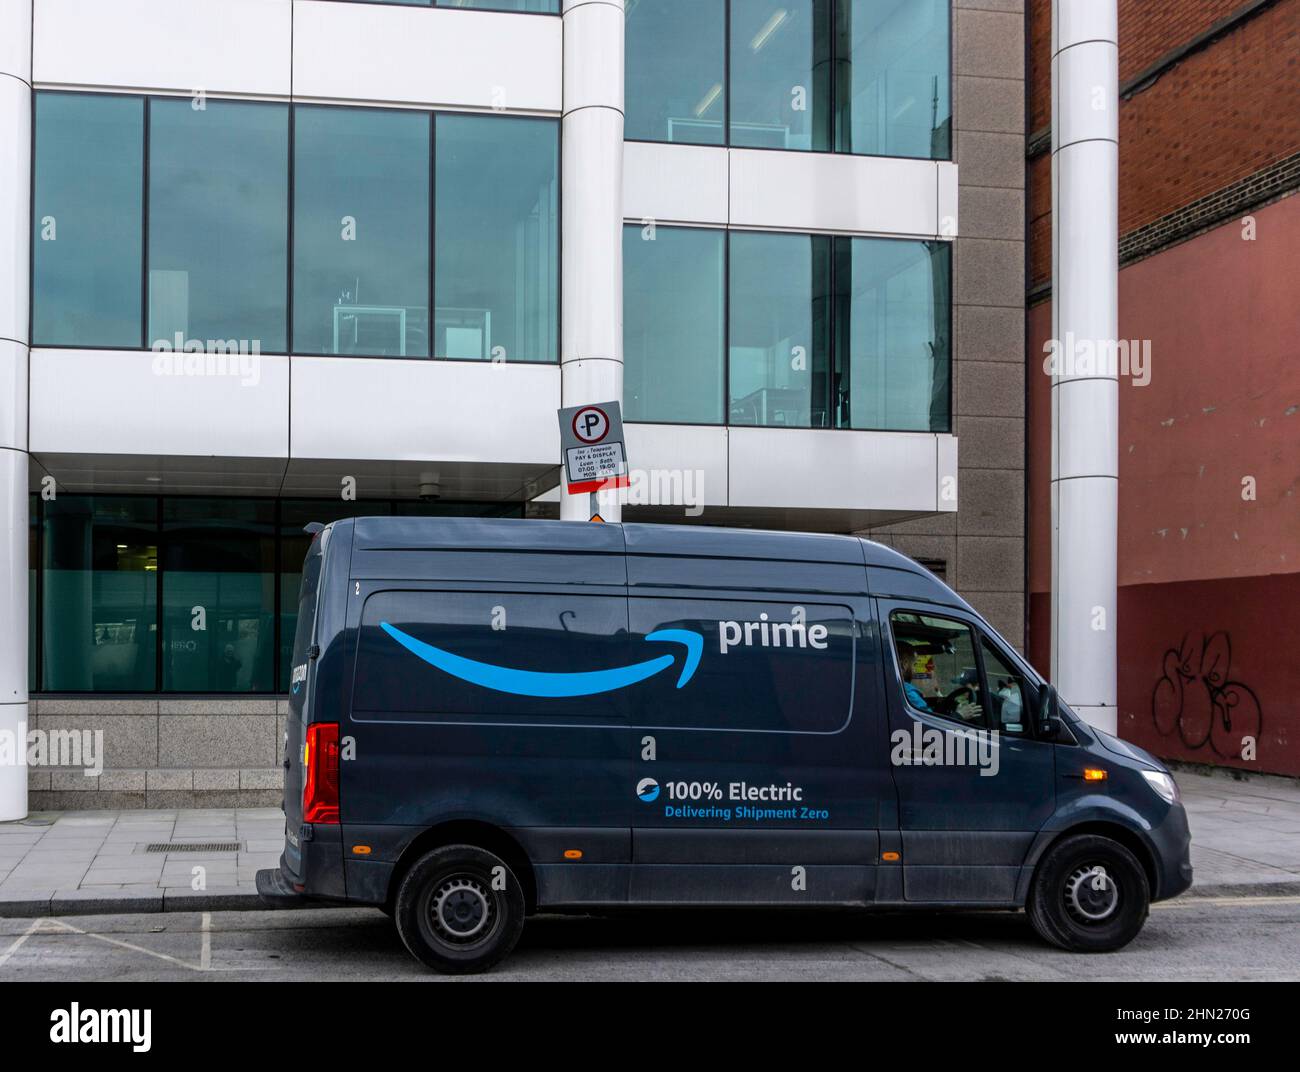 Delivery Van Amazon High Resolution Stock Photography and Images - Alamy